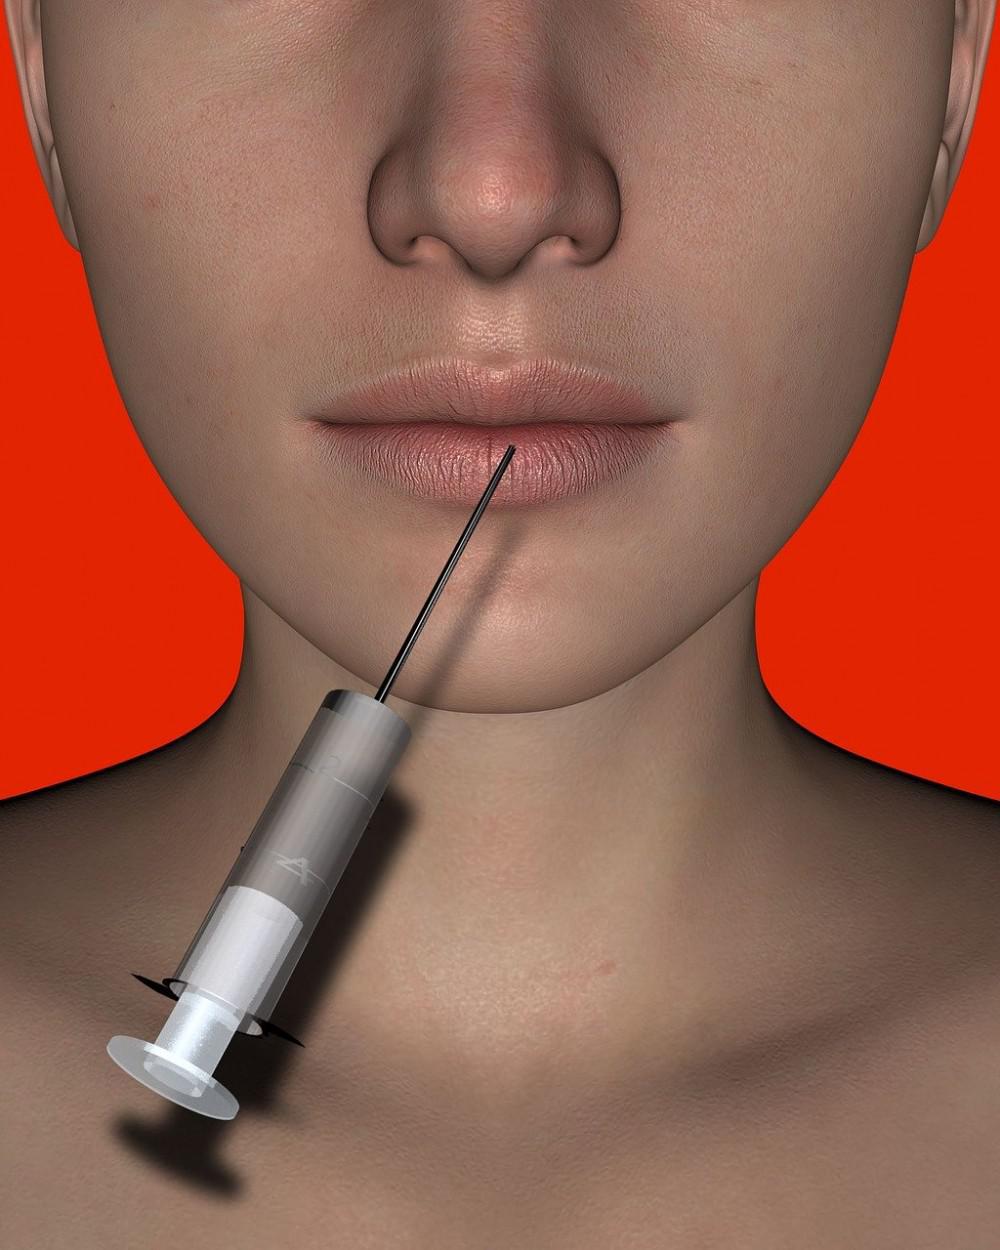 rendering of a syringe injecting botox into lips